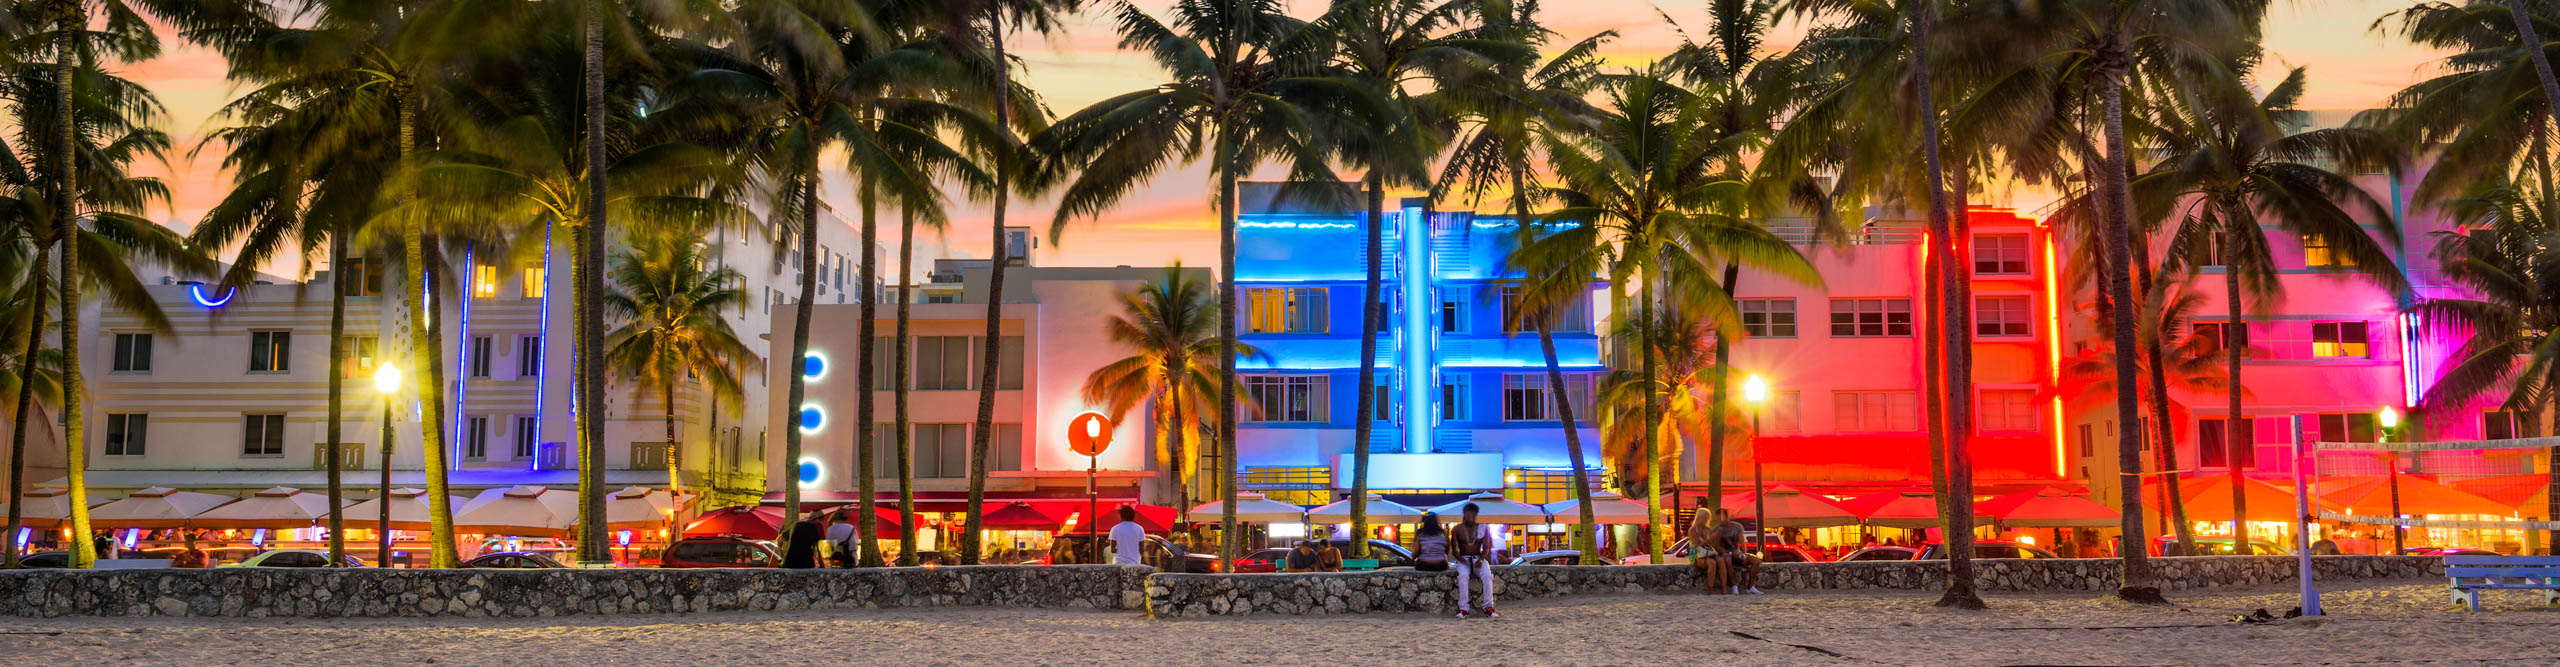 Ocean Drive at sunset, with neon lights and palm trees lining the street, Miami Beach, USA